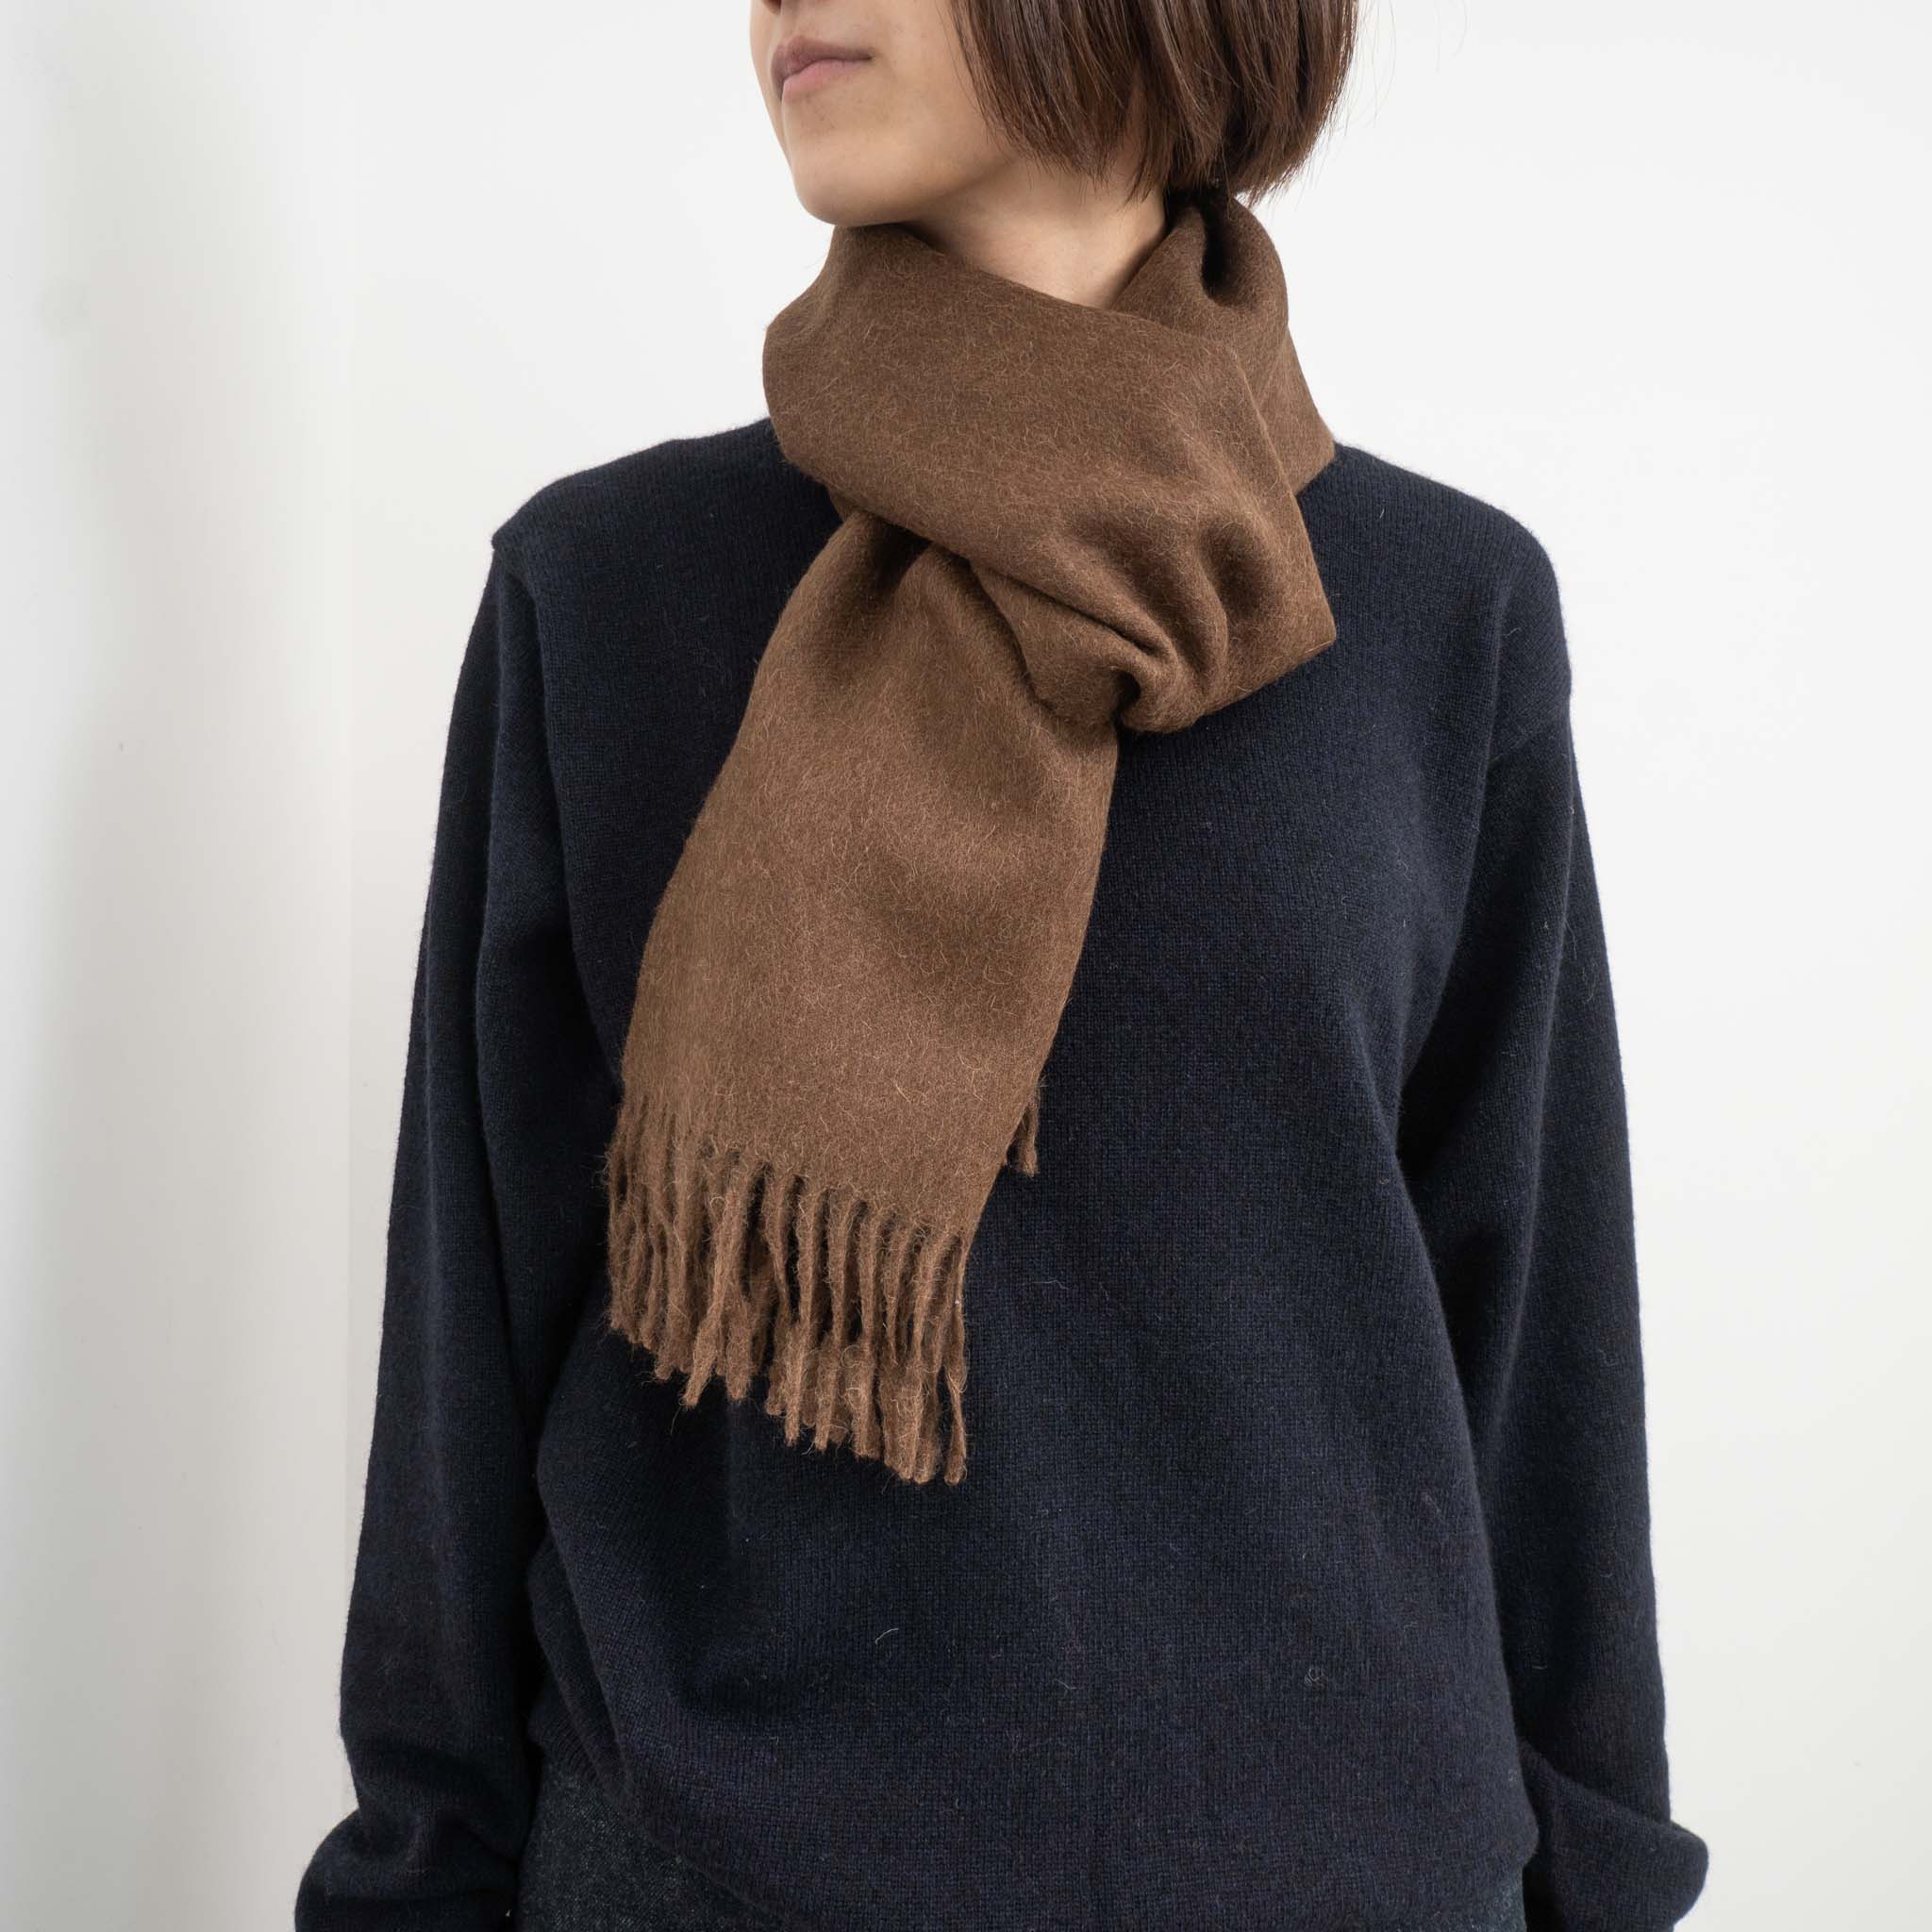 THE INOUE BROTHERS Brushed Scarf - マフラー